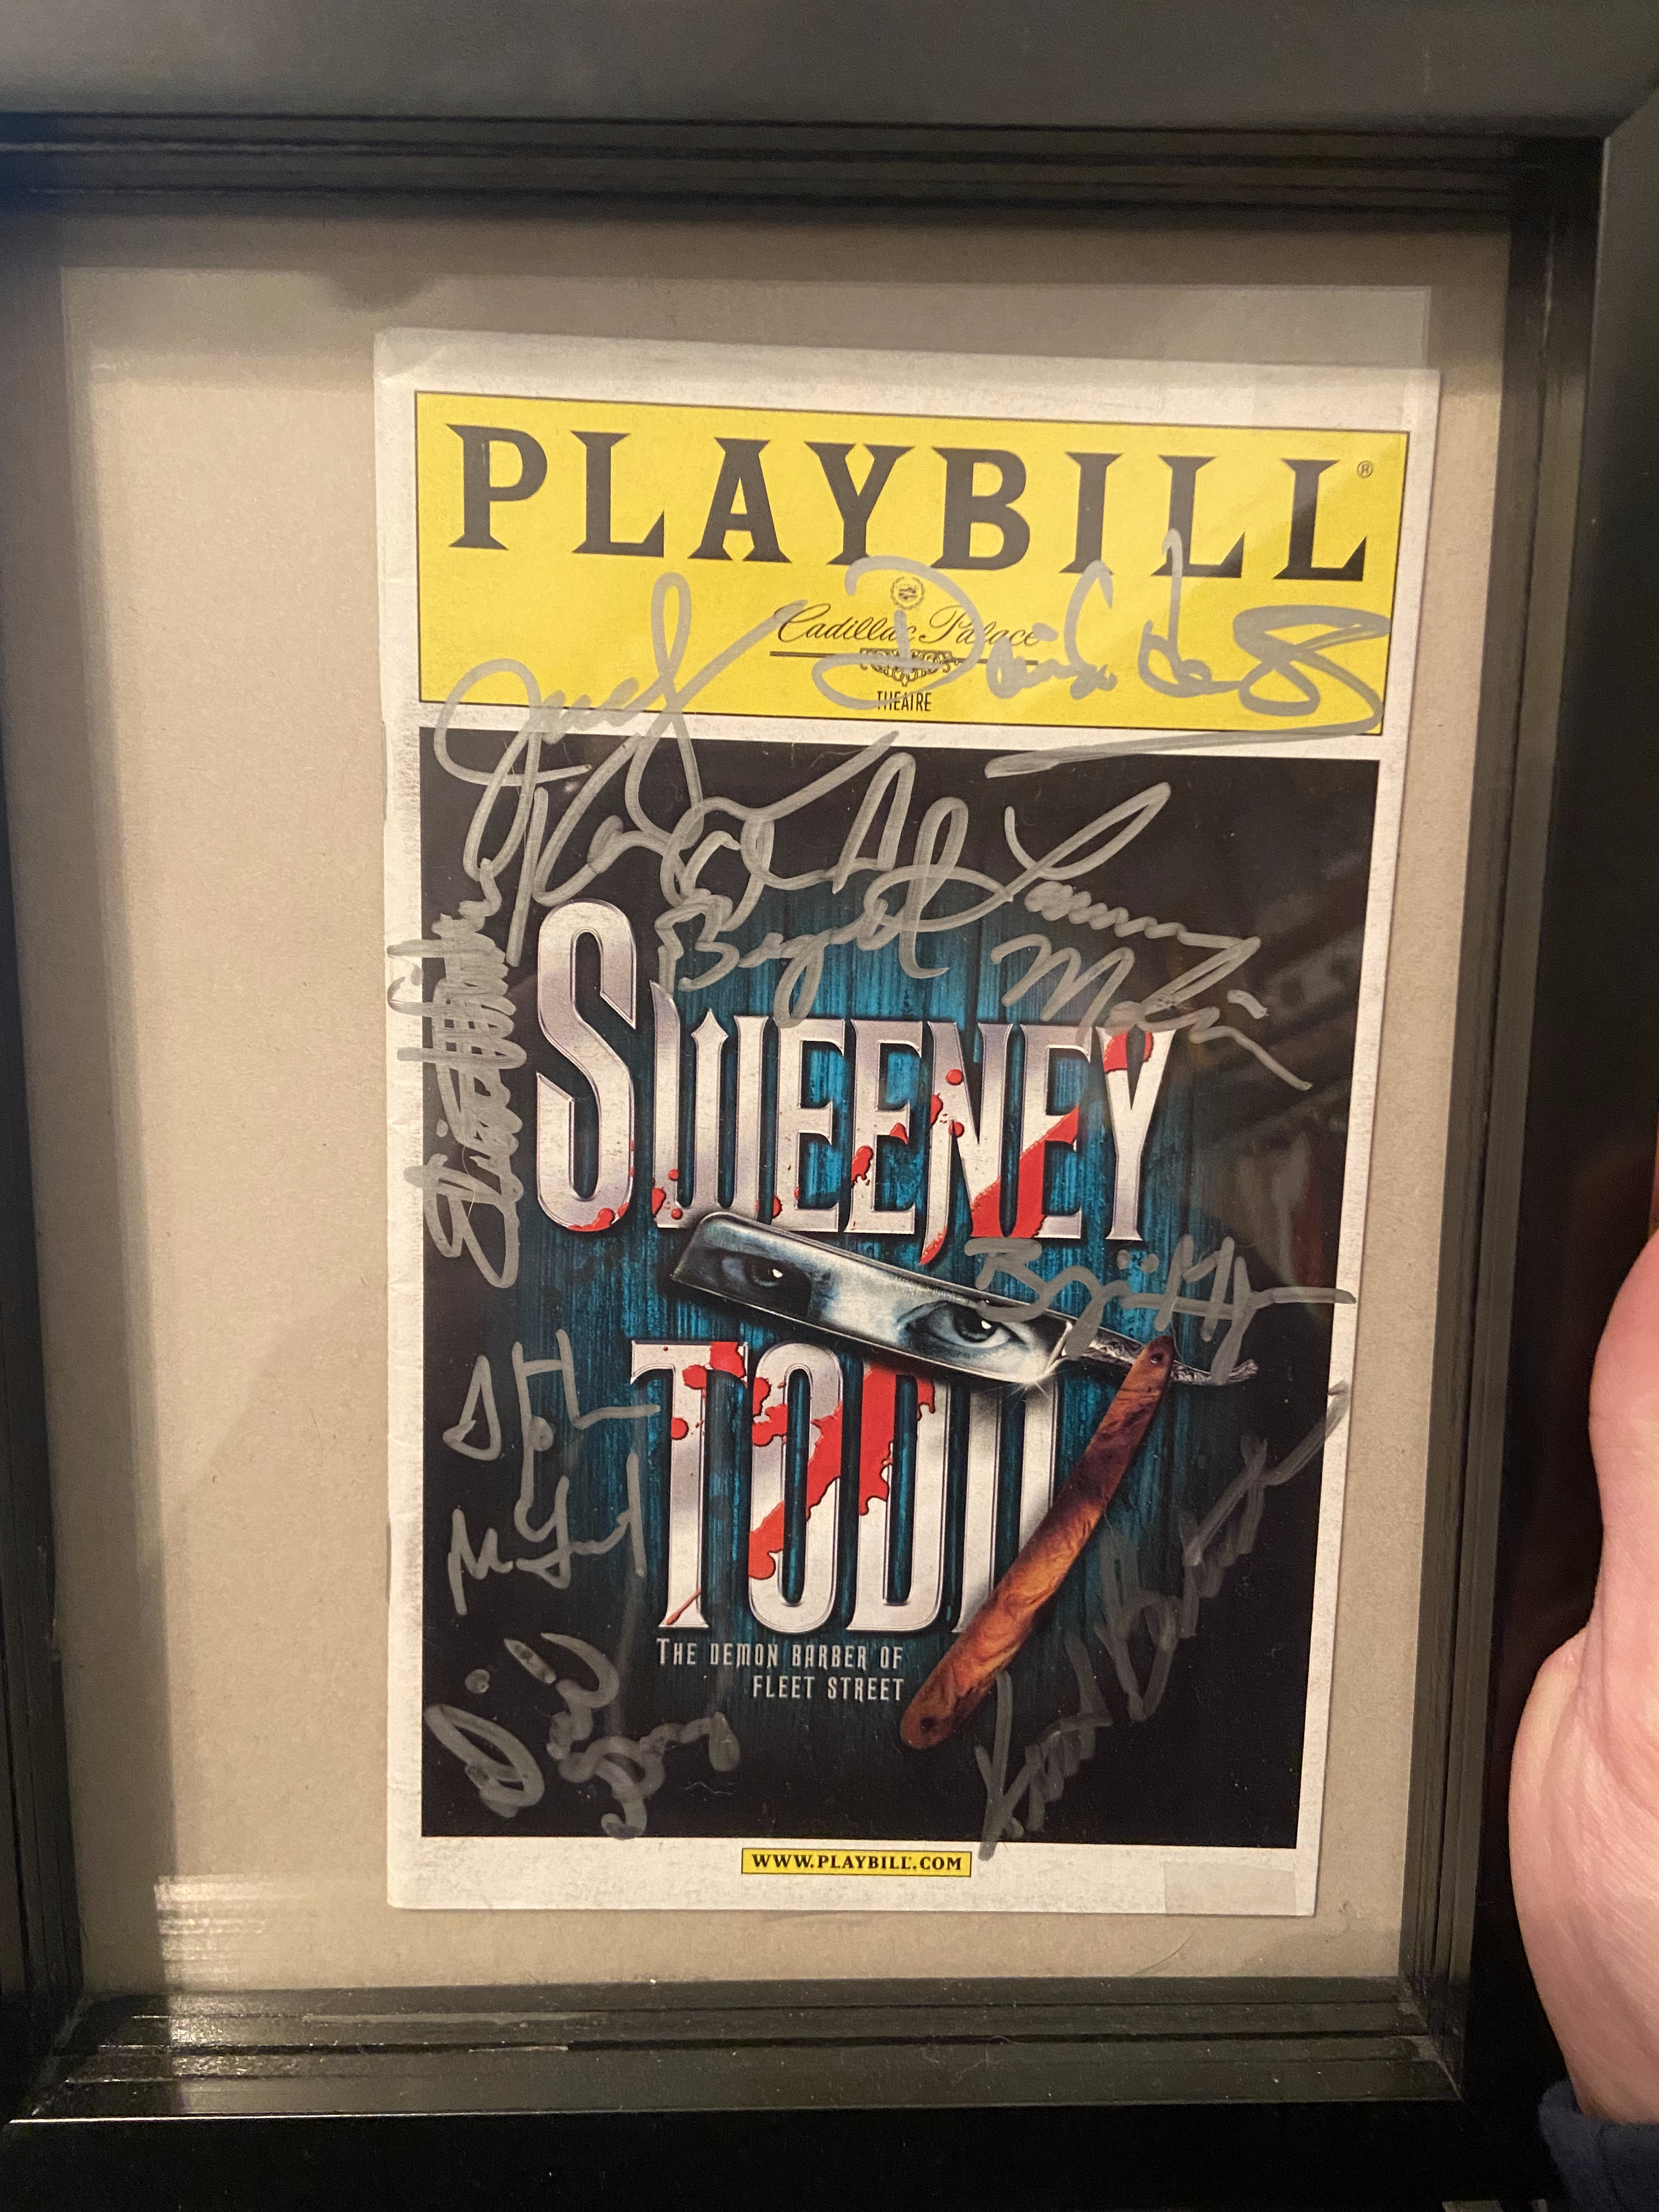 Signed Sweeney Todd Playbill - Cadillac Palace, Chicago 2008 - $200 OBO